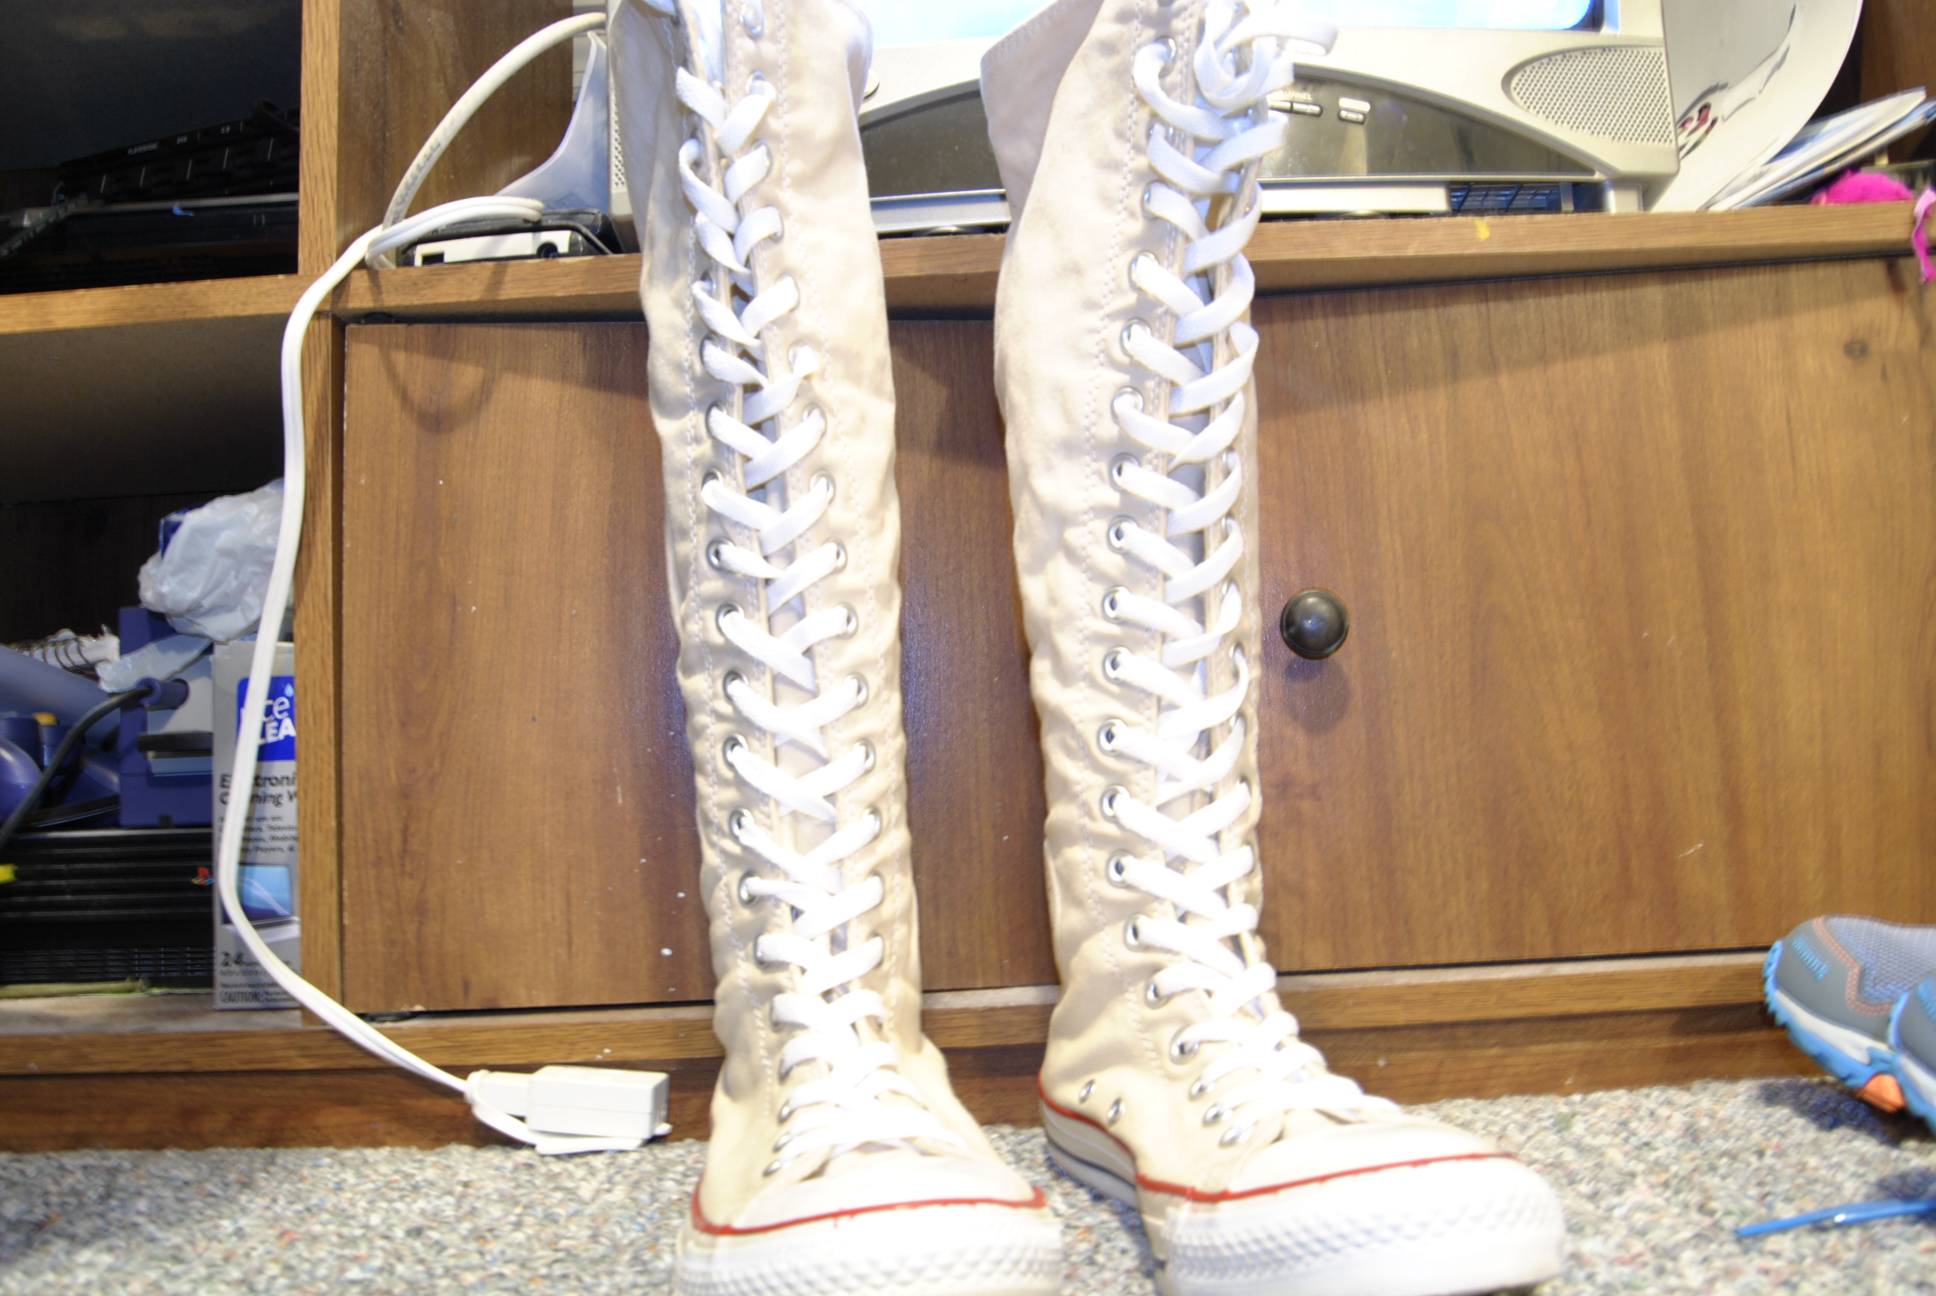 Slightly clearer photo of converse boots.  I tea dye the shoes and painted the black stripes red and blue.